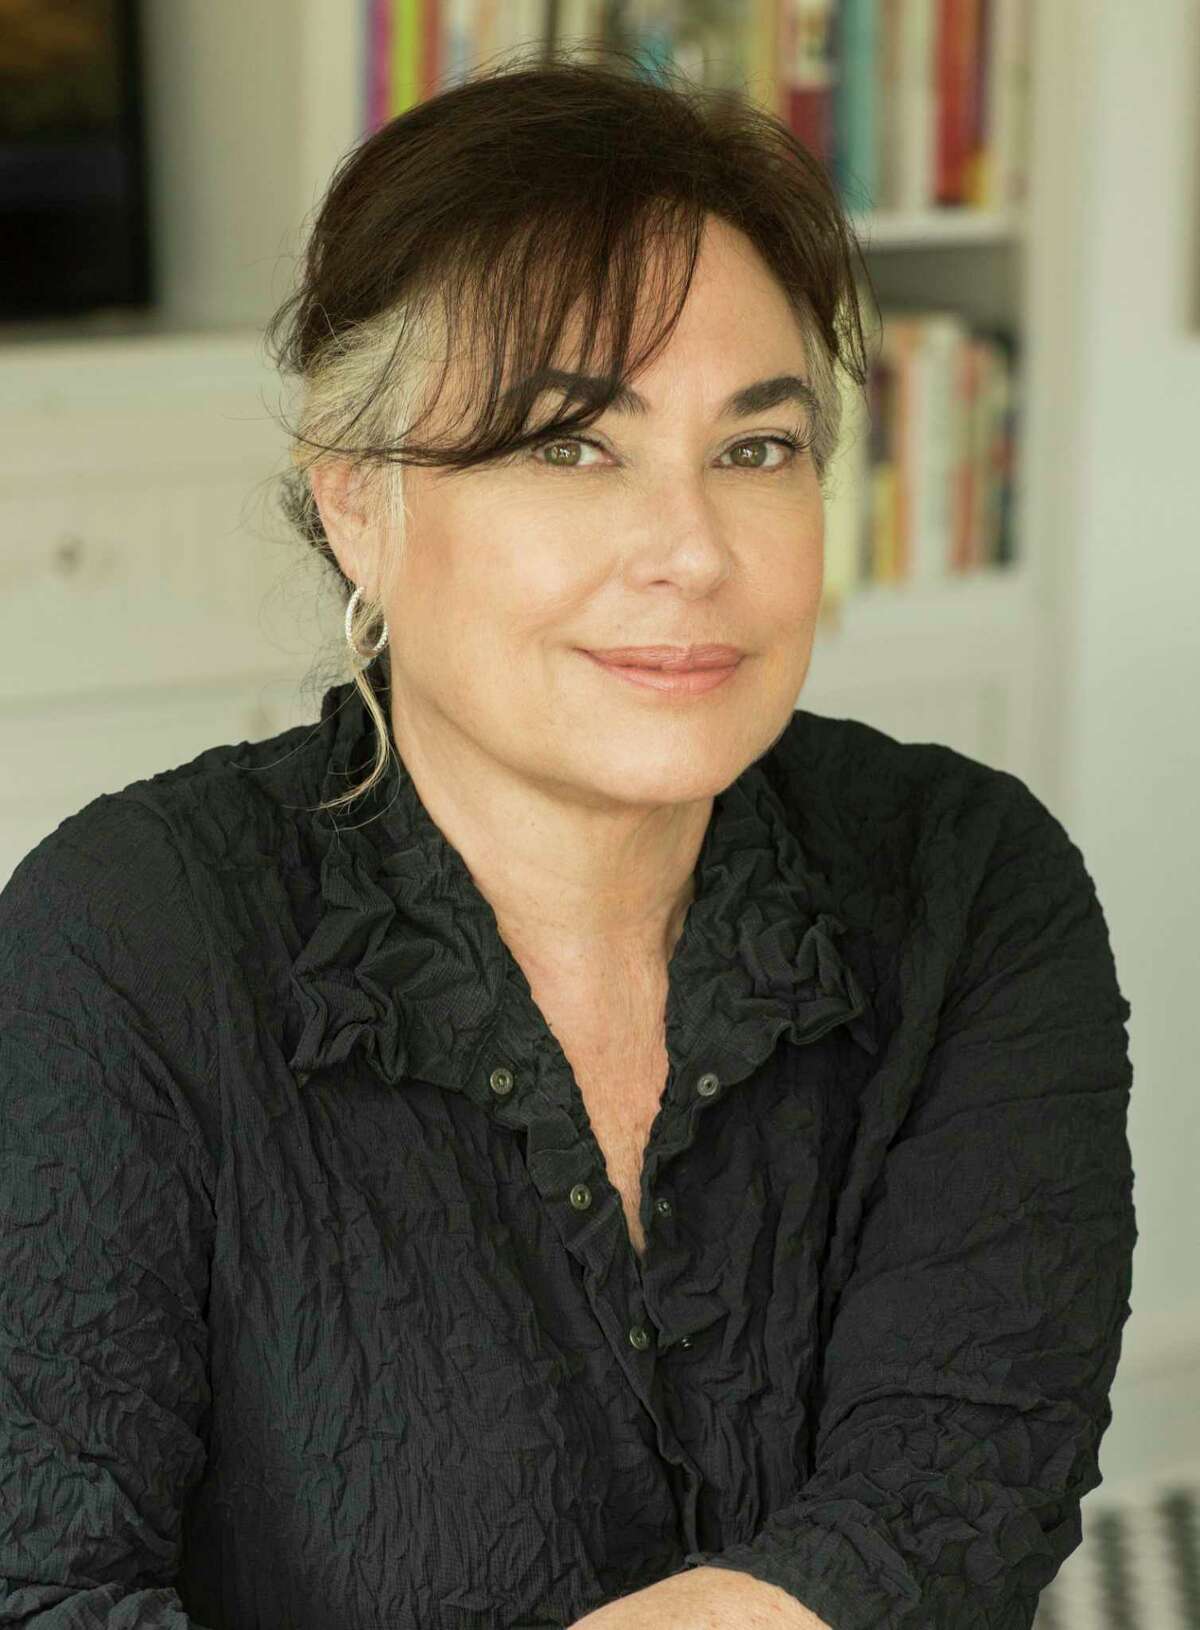 Amy Bloom, the New York Times best-selling author and finalist for the National Book Award.